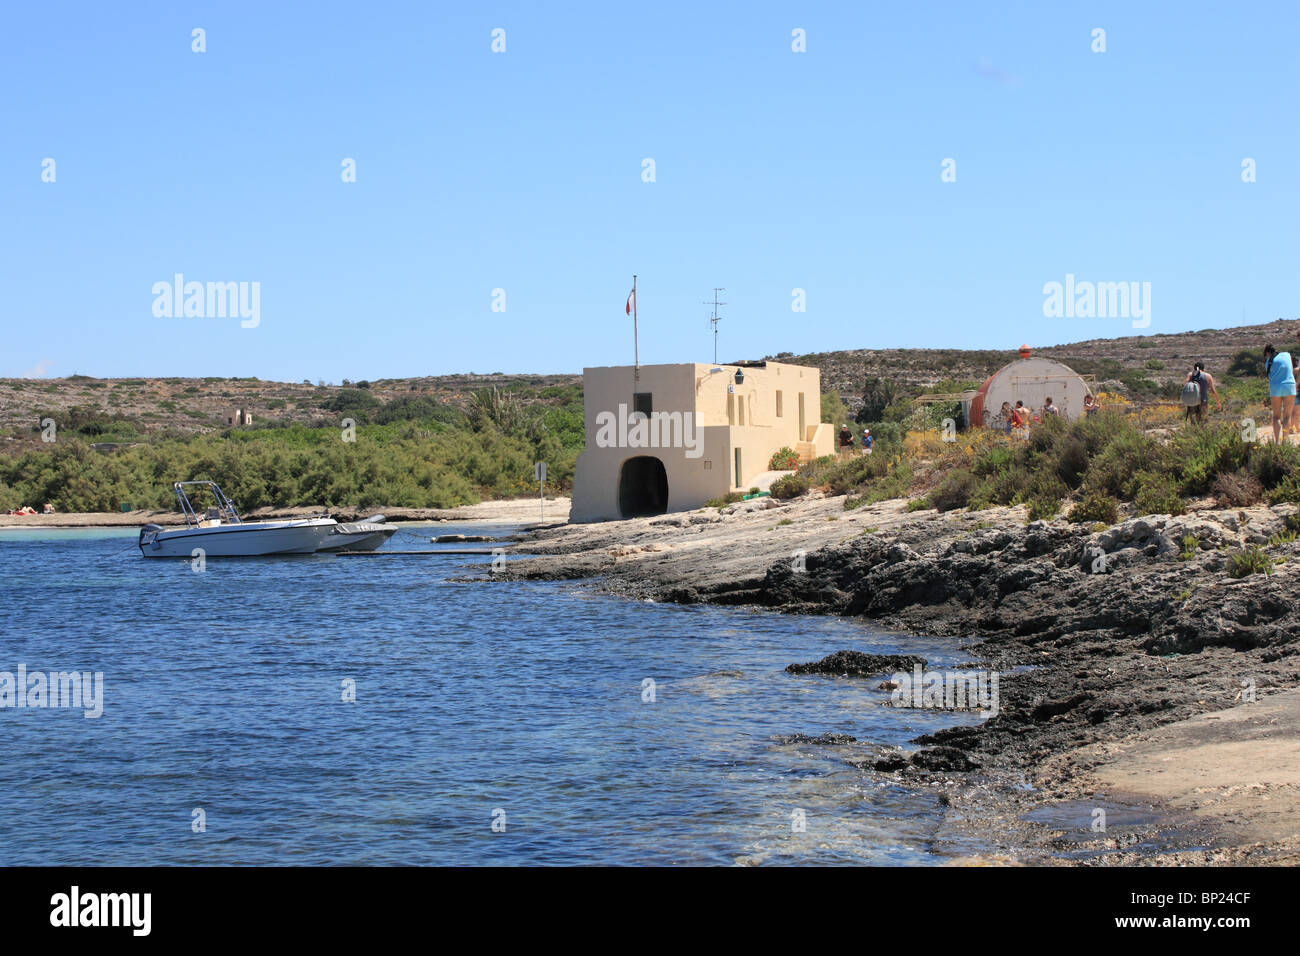 Police Station, St Mary's Bay, Comino Island, Malta, Mediterranean, Europe. Originally an outpost for the Knights of St John. Stock Photo